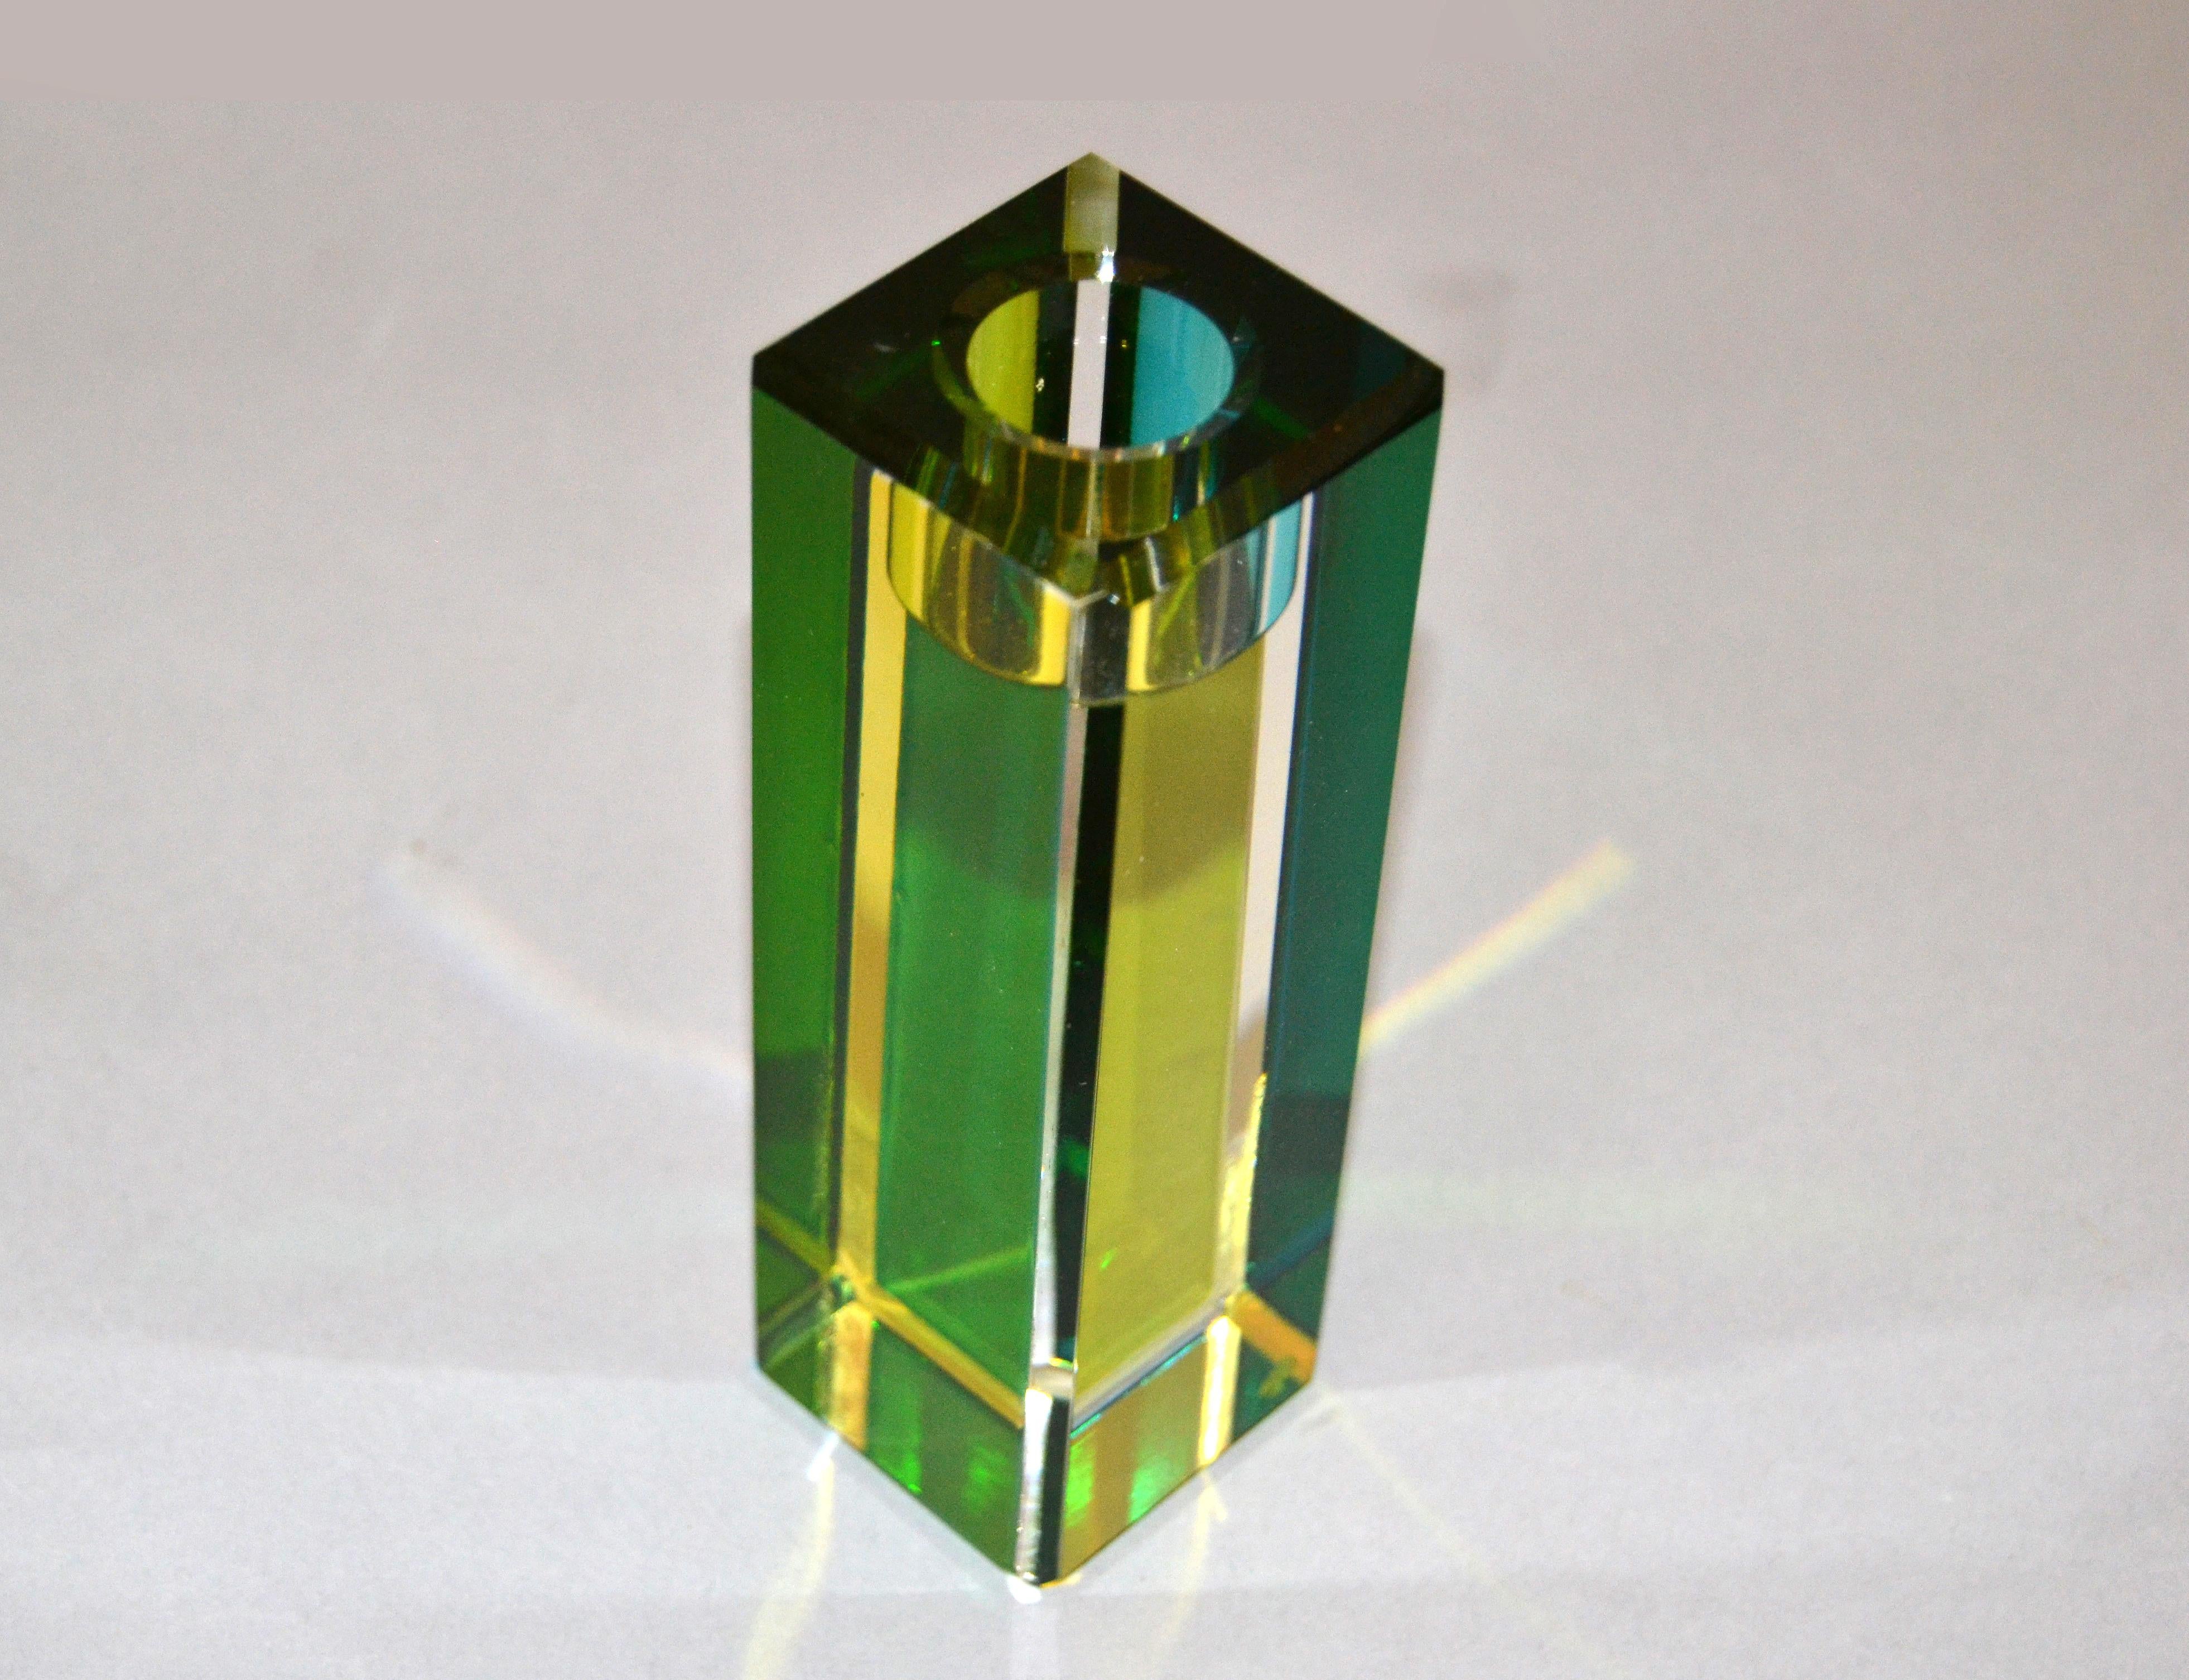 American Modern Crystal Kate Spade Jules Point Green and Blue Candlestick by Lenox